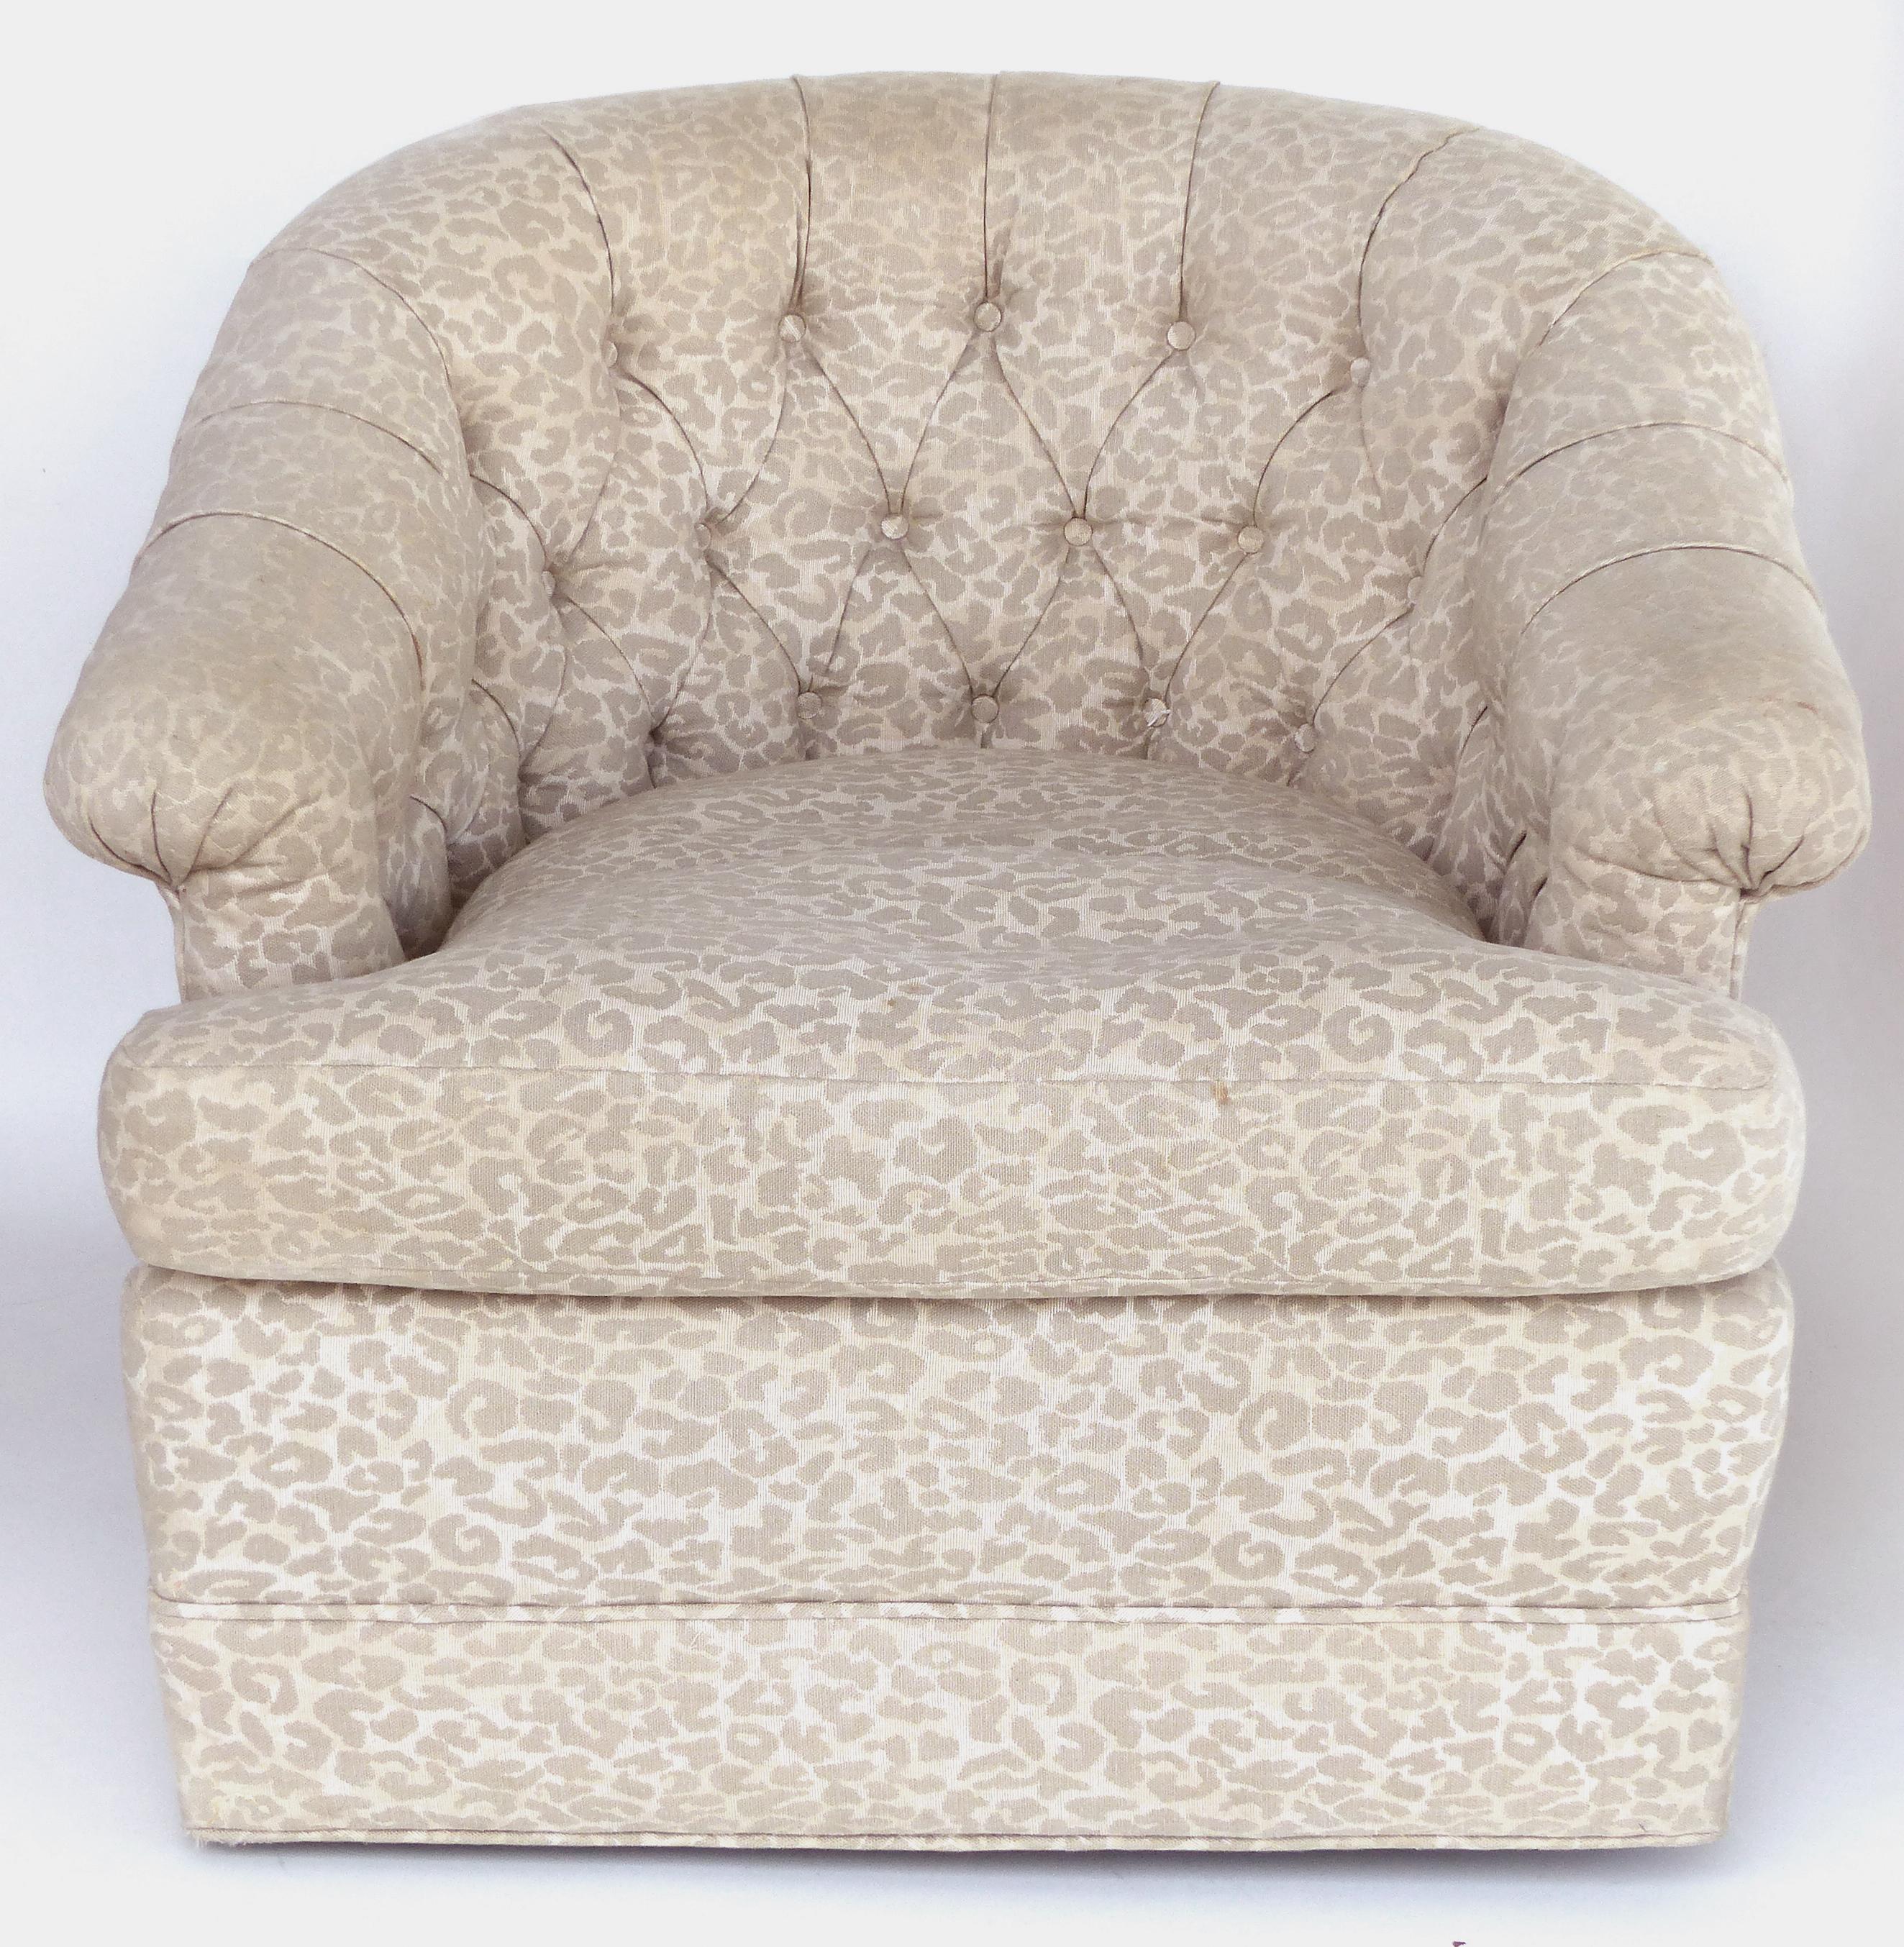 Upholstered Swivel Club Chairs with Tufted Backs, Pair

Offered for sale is a pair of swivel chairs with tufted backs and animal print upholstery. These comfortable chairs are sturdy and swivel nicely but re-upholstering is suggested as the fabric